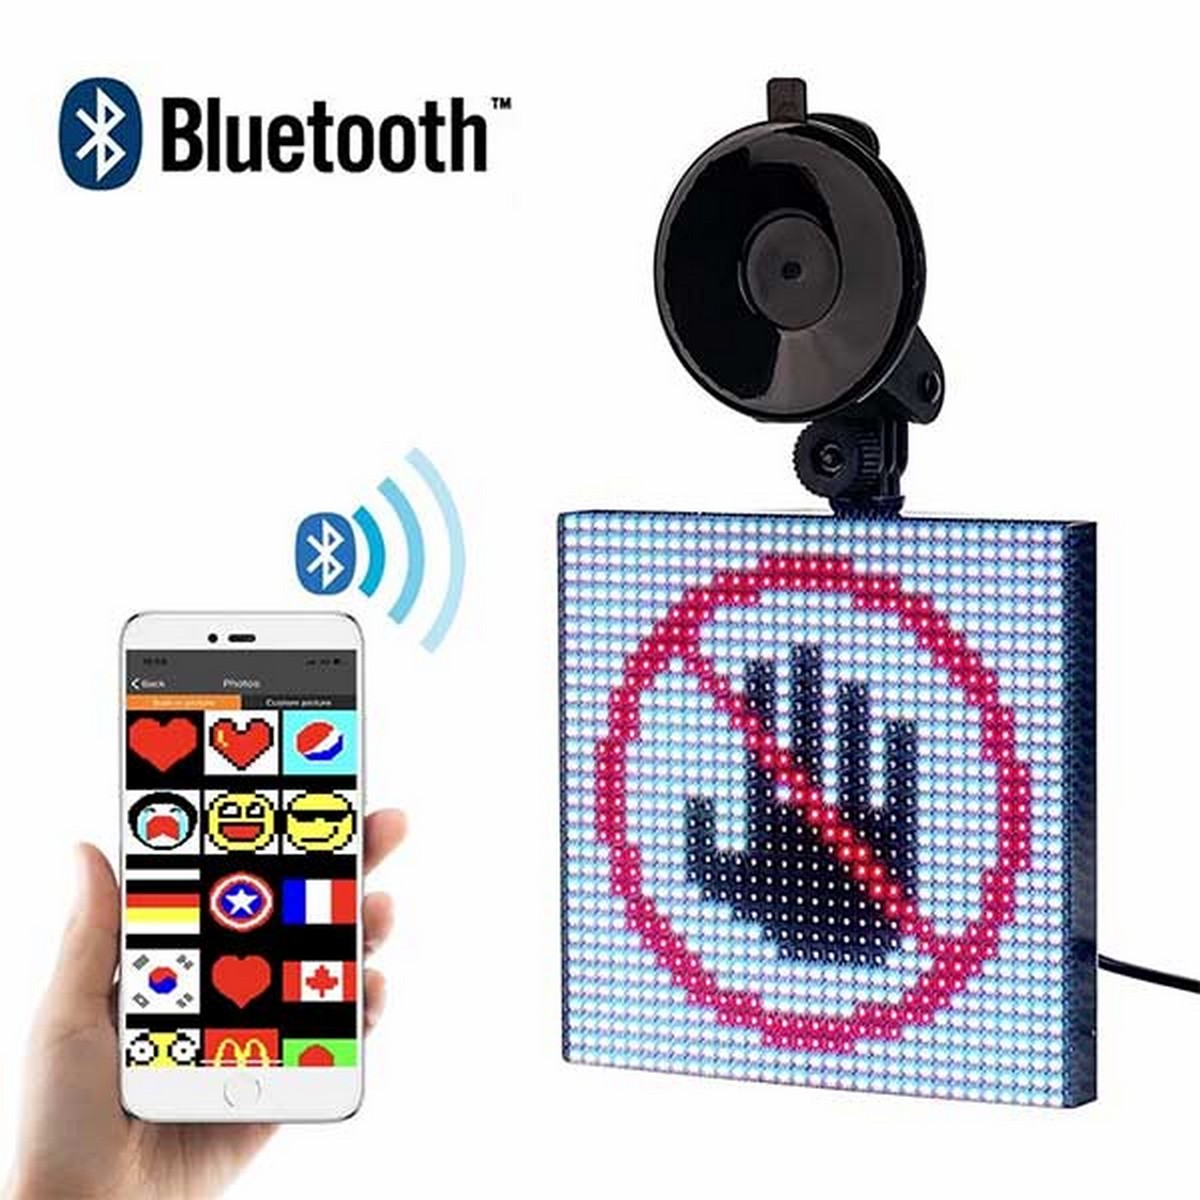 Led screen for car RGB square display with Bluetooth control via